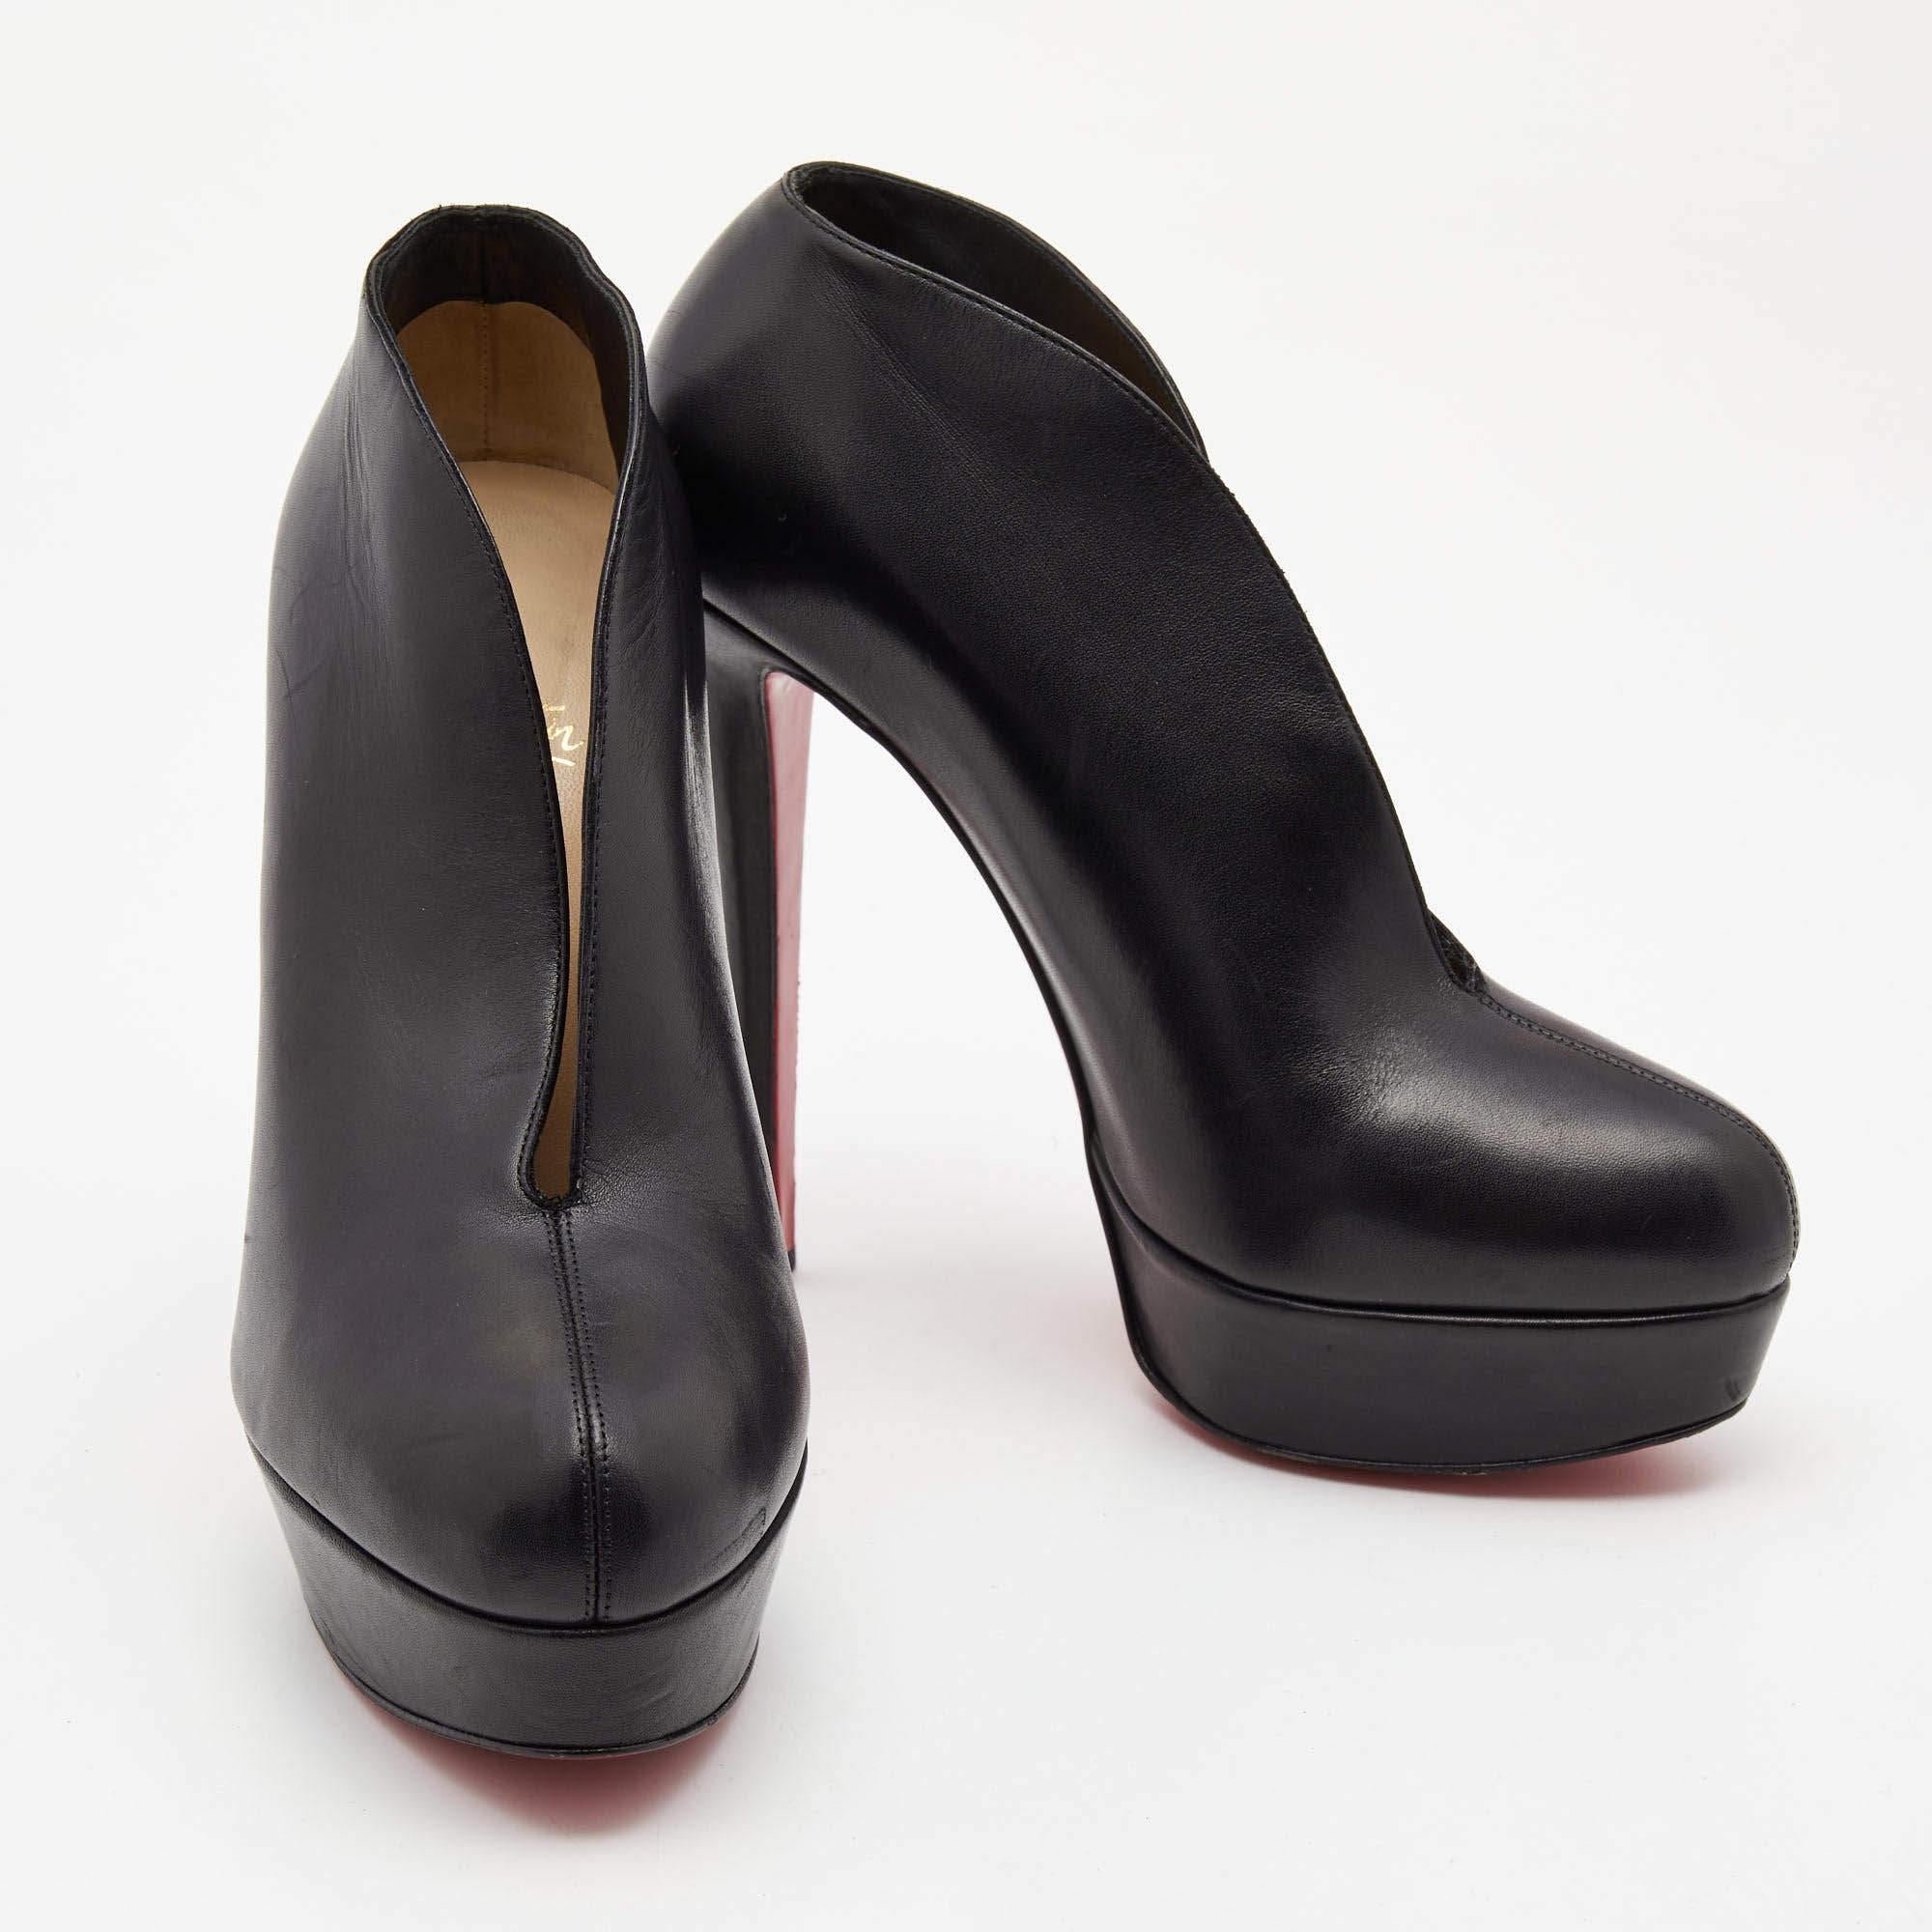 Christian Louboutin Black Leather Miss Fast Plato Platform Ankle Booties Size 38 In Good Condition For Sale In Dubai, Al Qouz 2